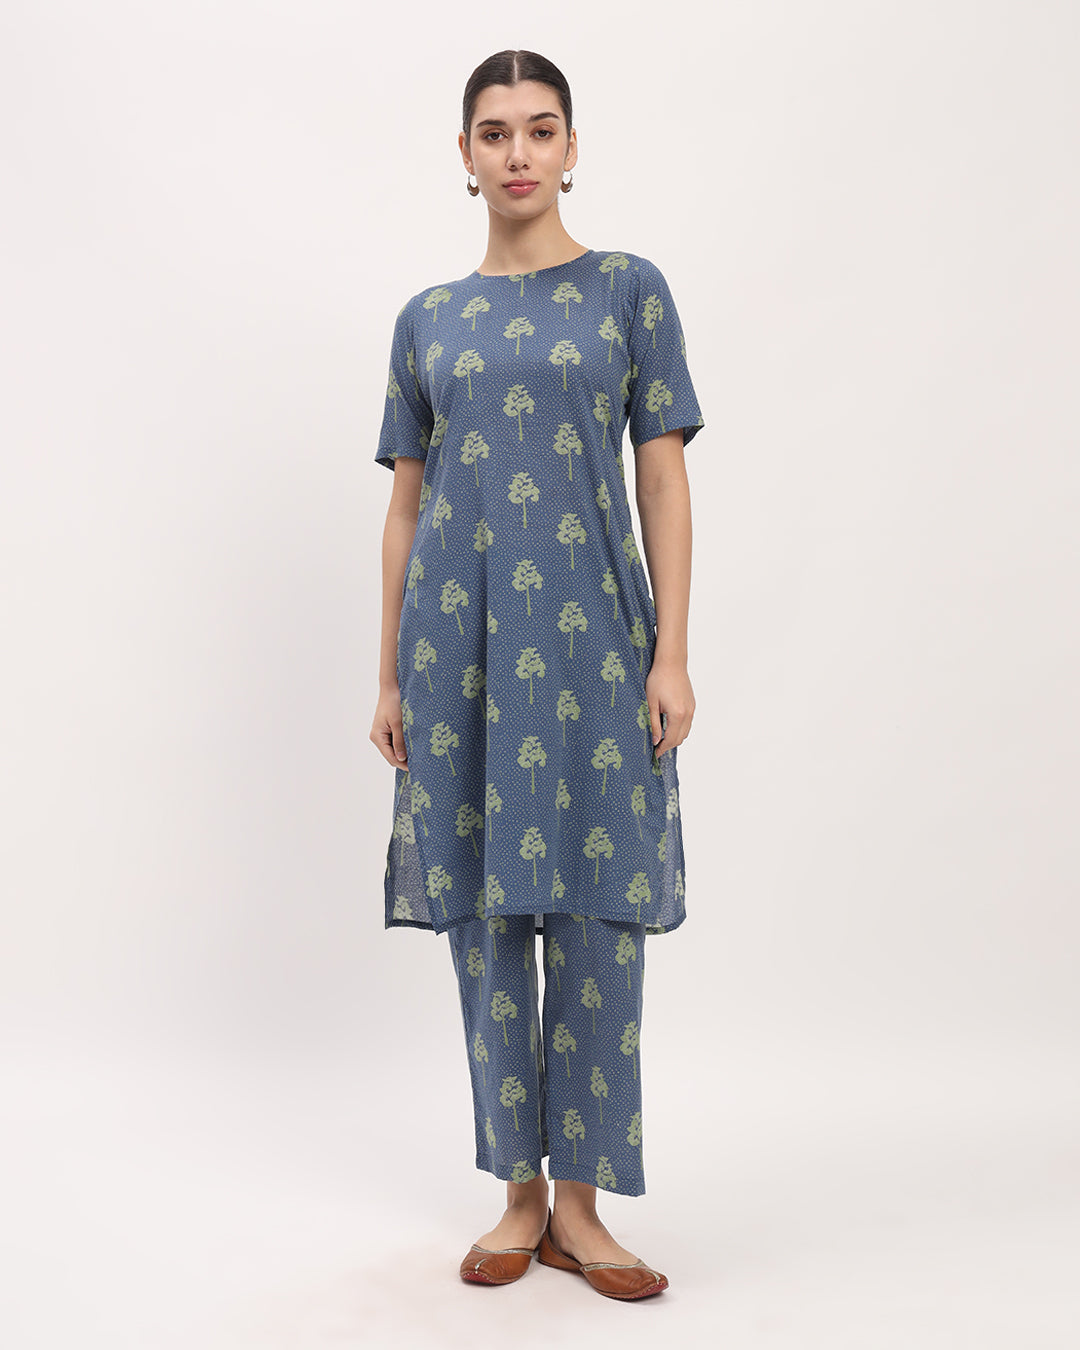 Combo: Maple Leaf & English Floral Symphony Round Neck Printed Kurta (Without Bottoms)